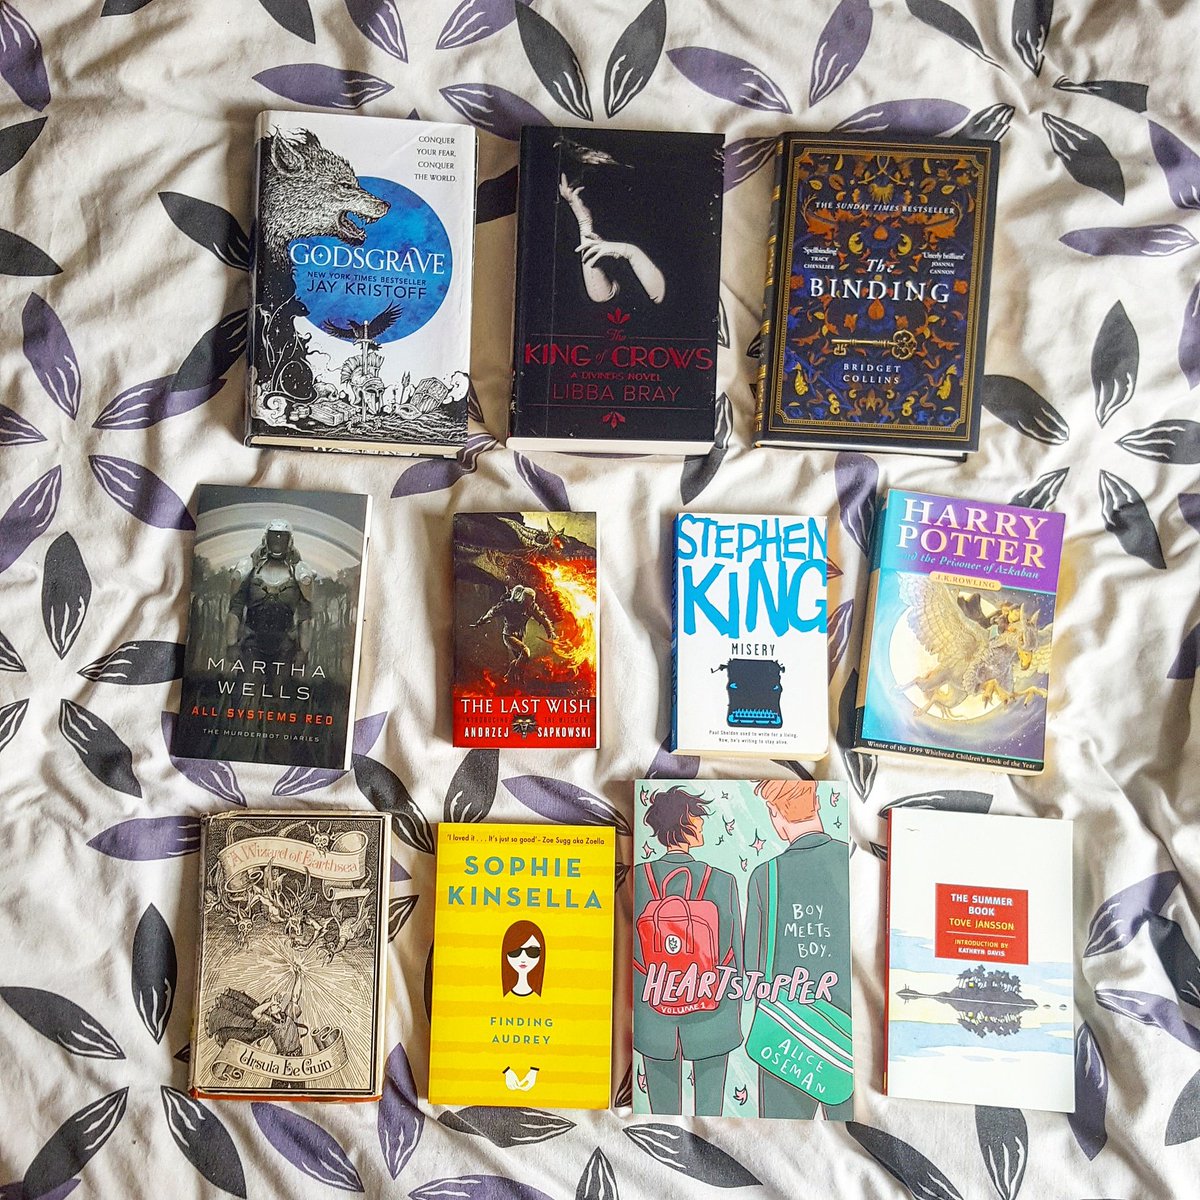 My OWLs readathon TBR (Missing from picture: Peter Pan and maybe a dragon book?? Missed that prompt. Does Kings of the Wyld have dragons?)Going for Librarian, Healer or stretch goal of Alchemist careers. #OWLsReadathon2020  @MagicalReadthn  #OwlsReadathon  #MagicalReadathon2020